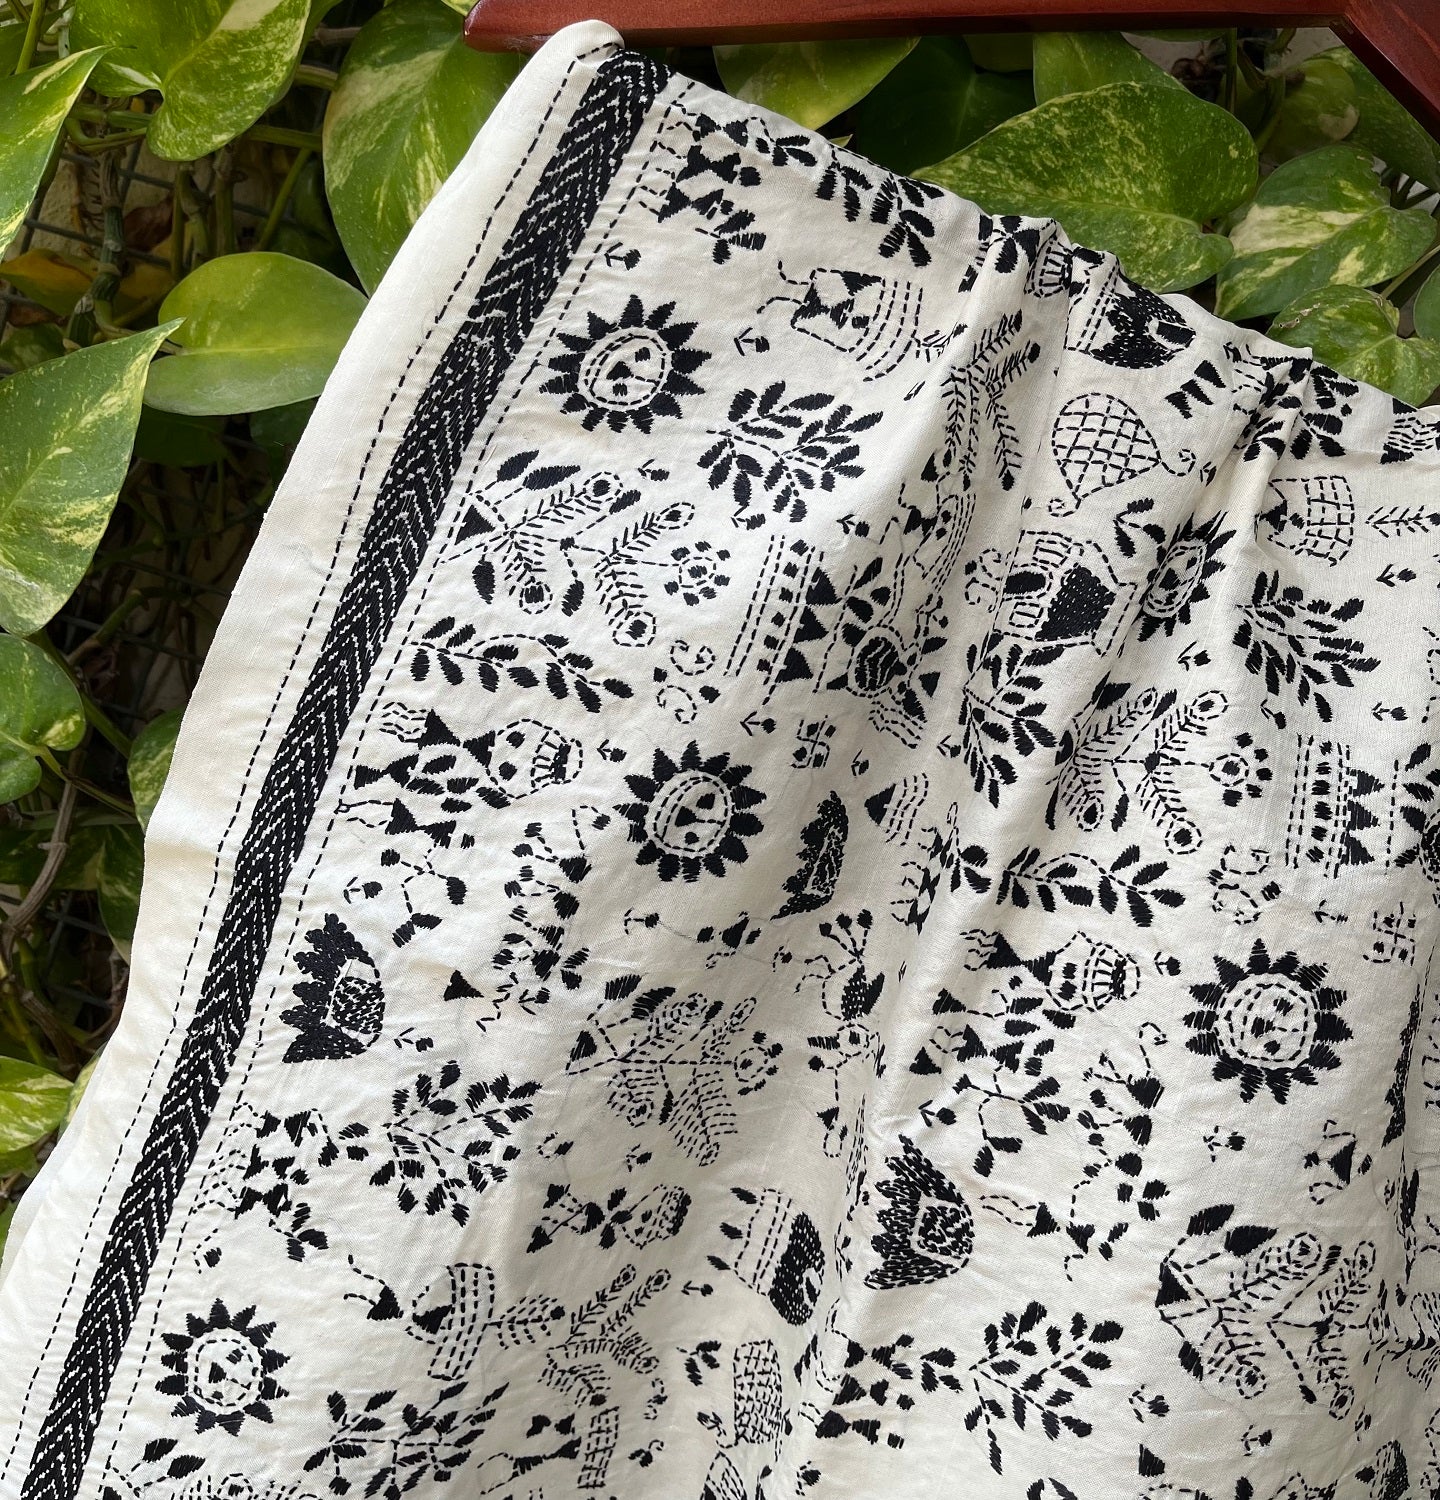 HAND EMBROIDERY STOLE WARLI warlistole stoles stole silkstole gifts indian corporate gifts